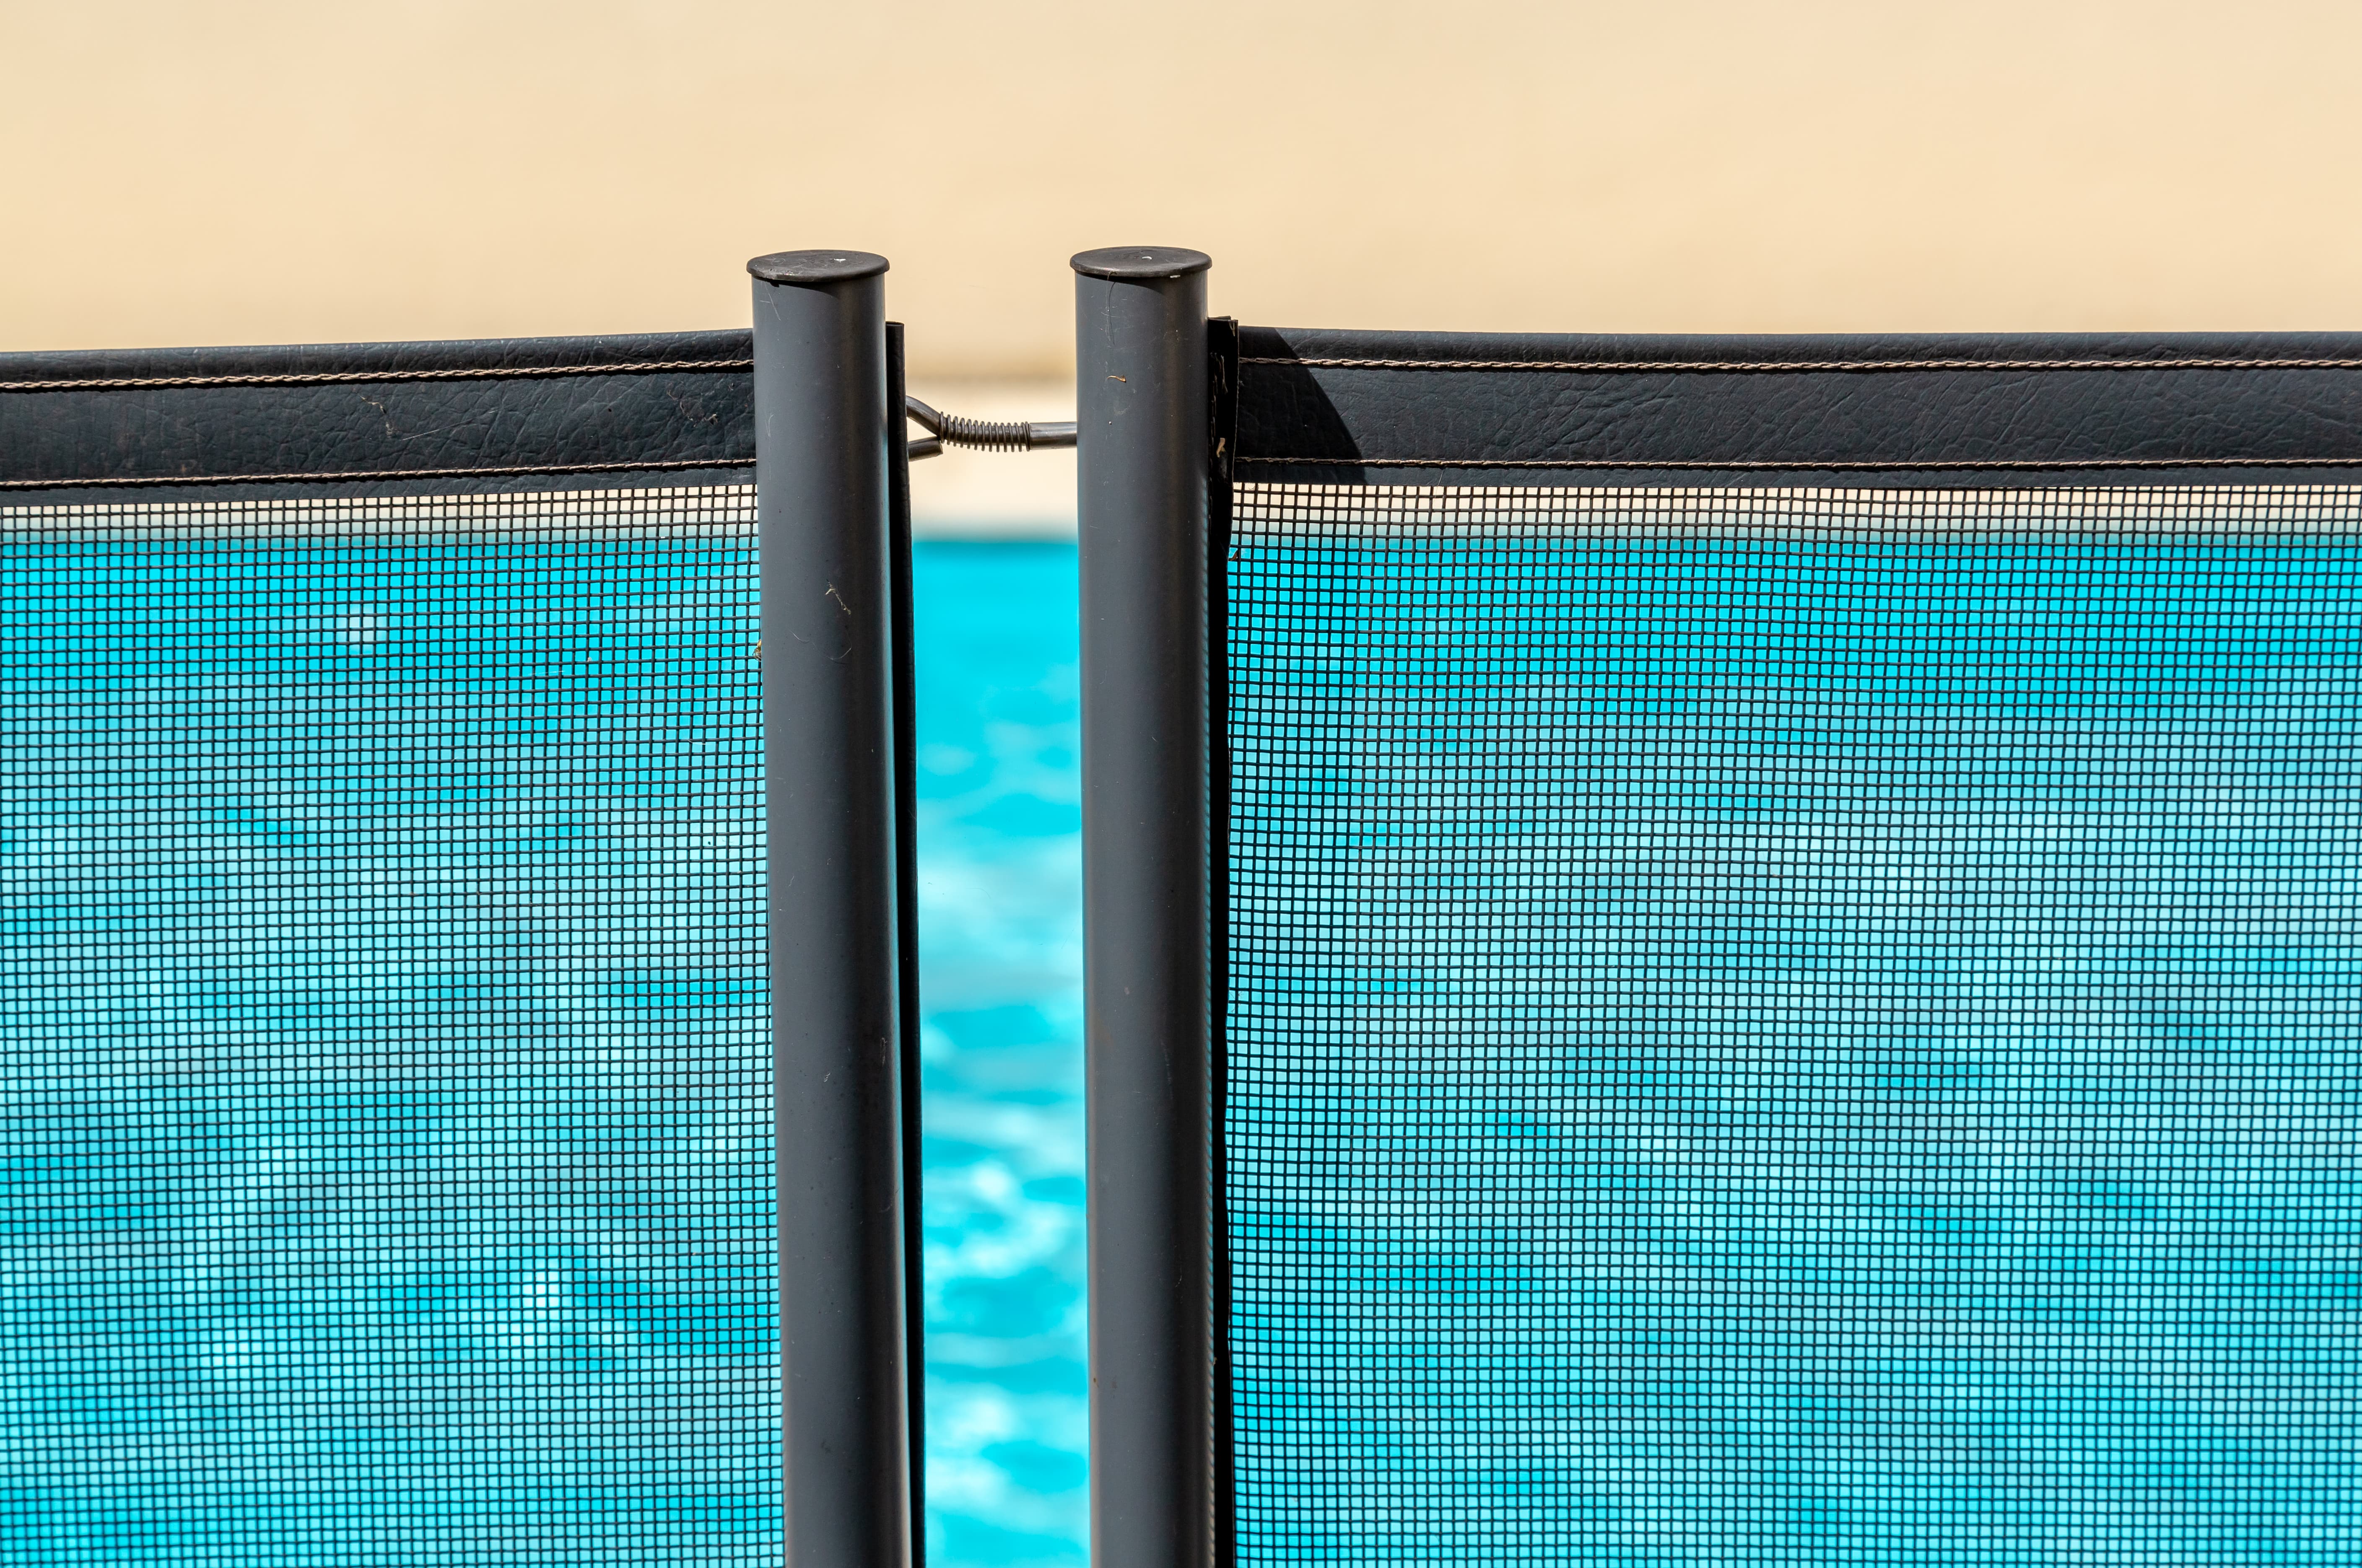 16 Pool Fence Ideas That Will Upgrade Your Yard